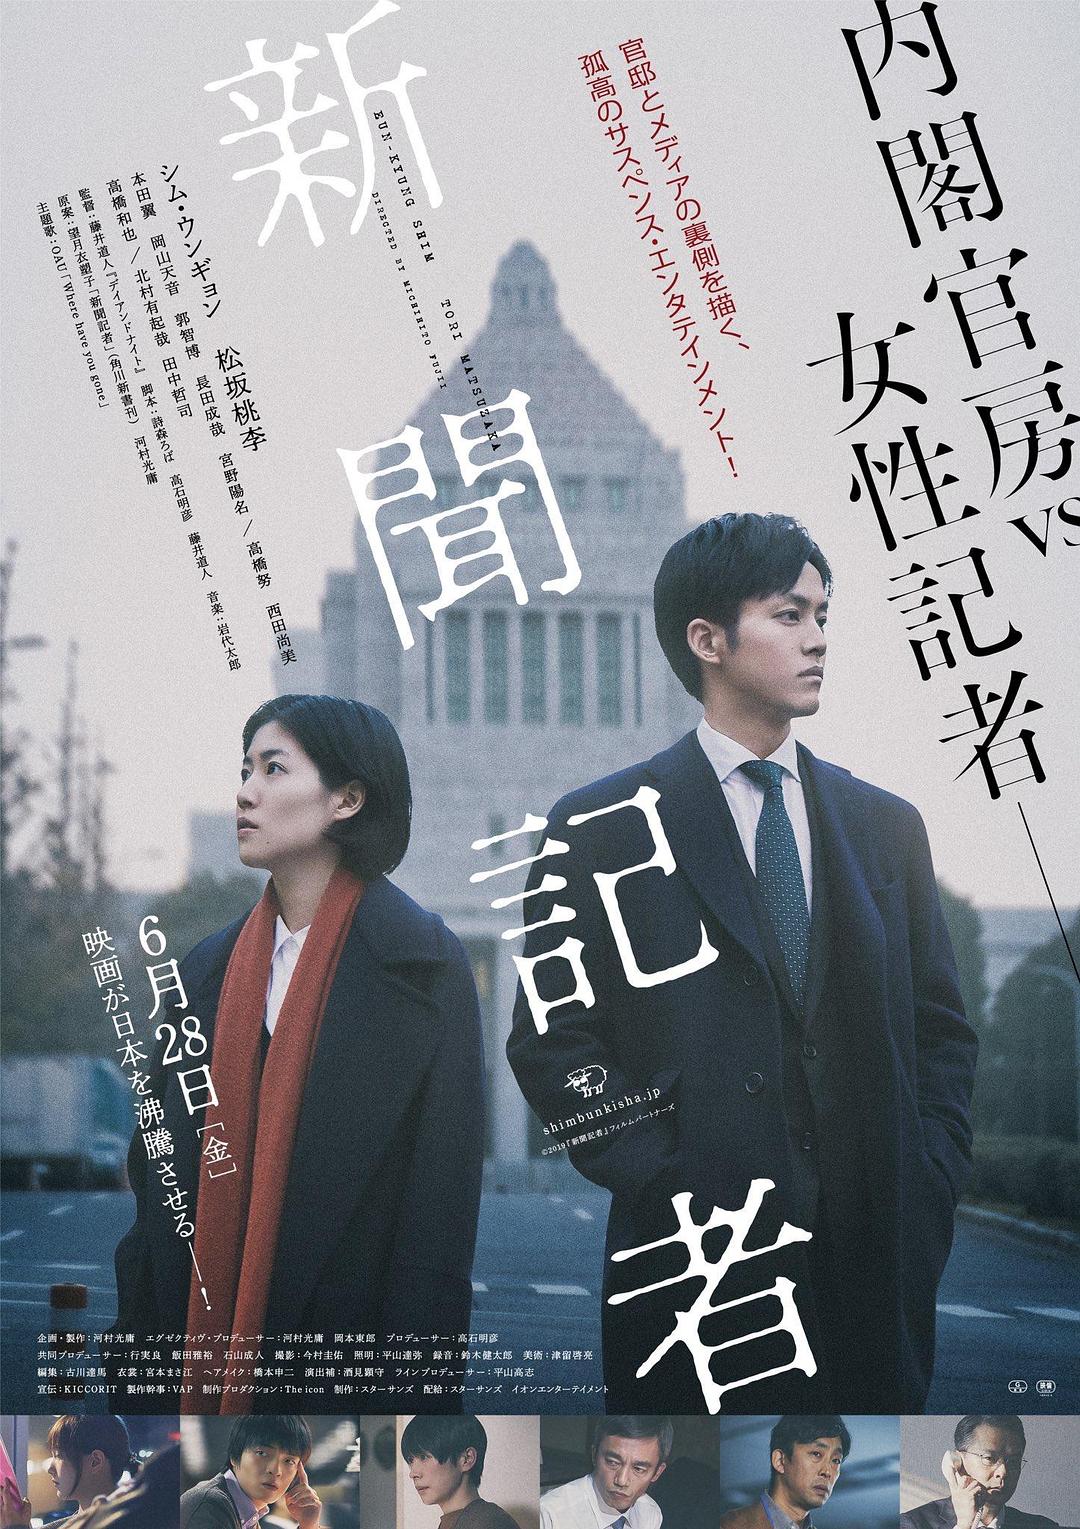 ż The.Journalist.2019.JAPANESE.1080p.BluRay.x264.DTS-iKiW 9.35GB-1.png